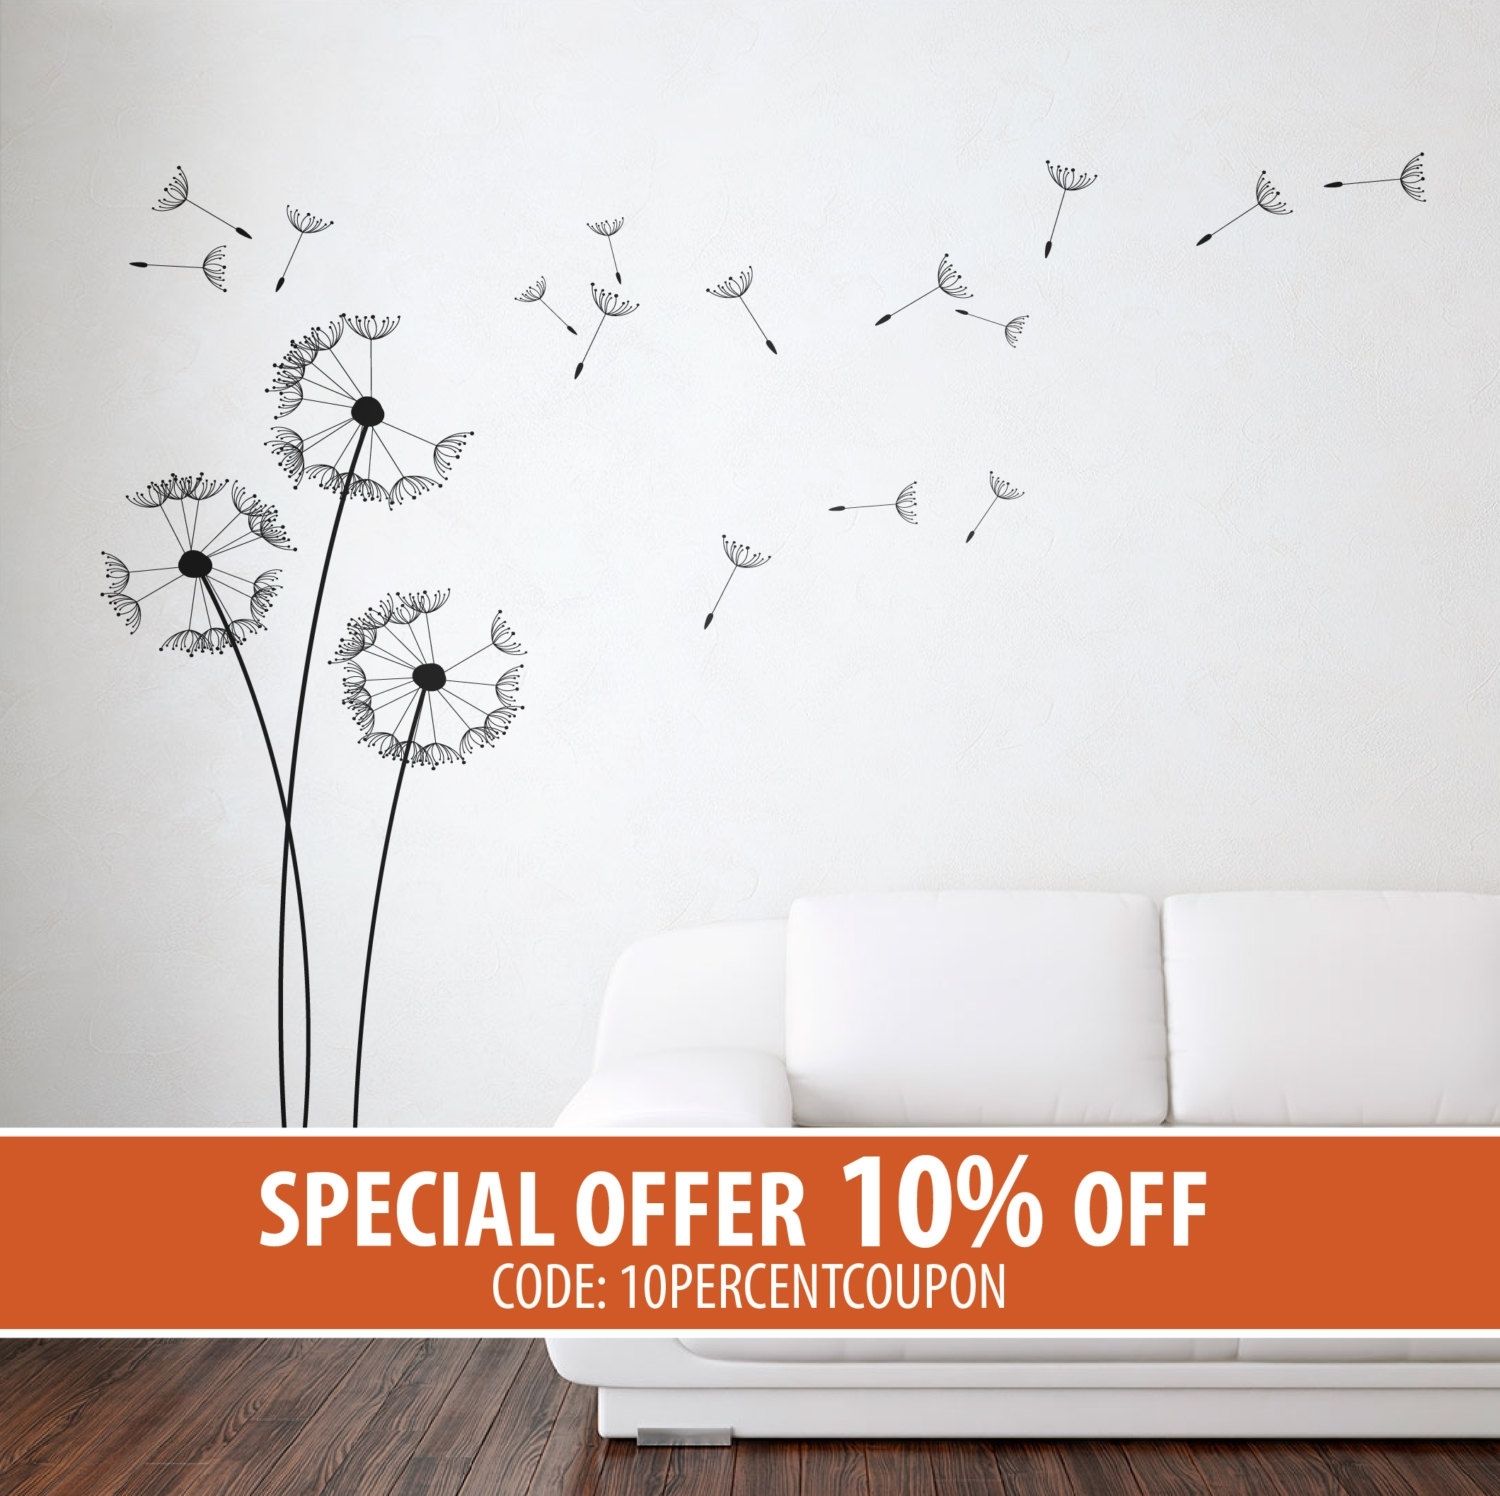 Dandelion Wall Stickers – Dandelion Stickers – Dandelion Wall Art With Current Dandelion Wall Art (View 12 of 20)